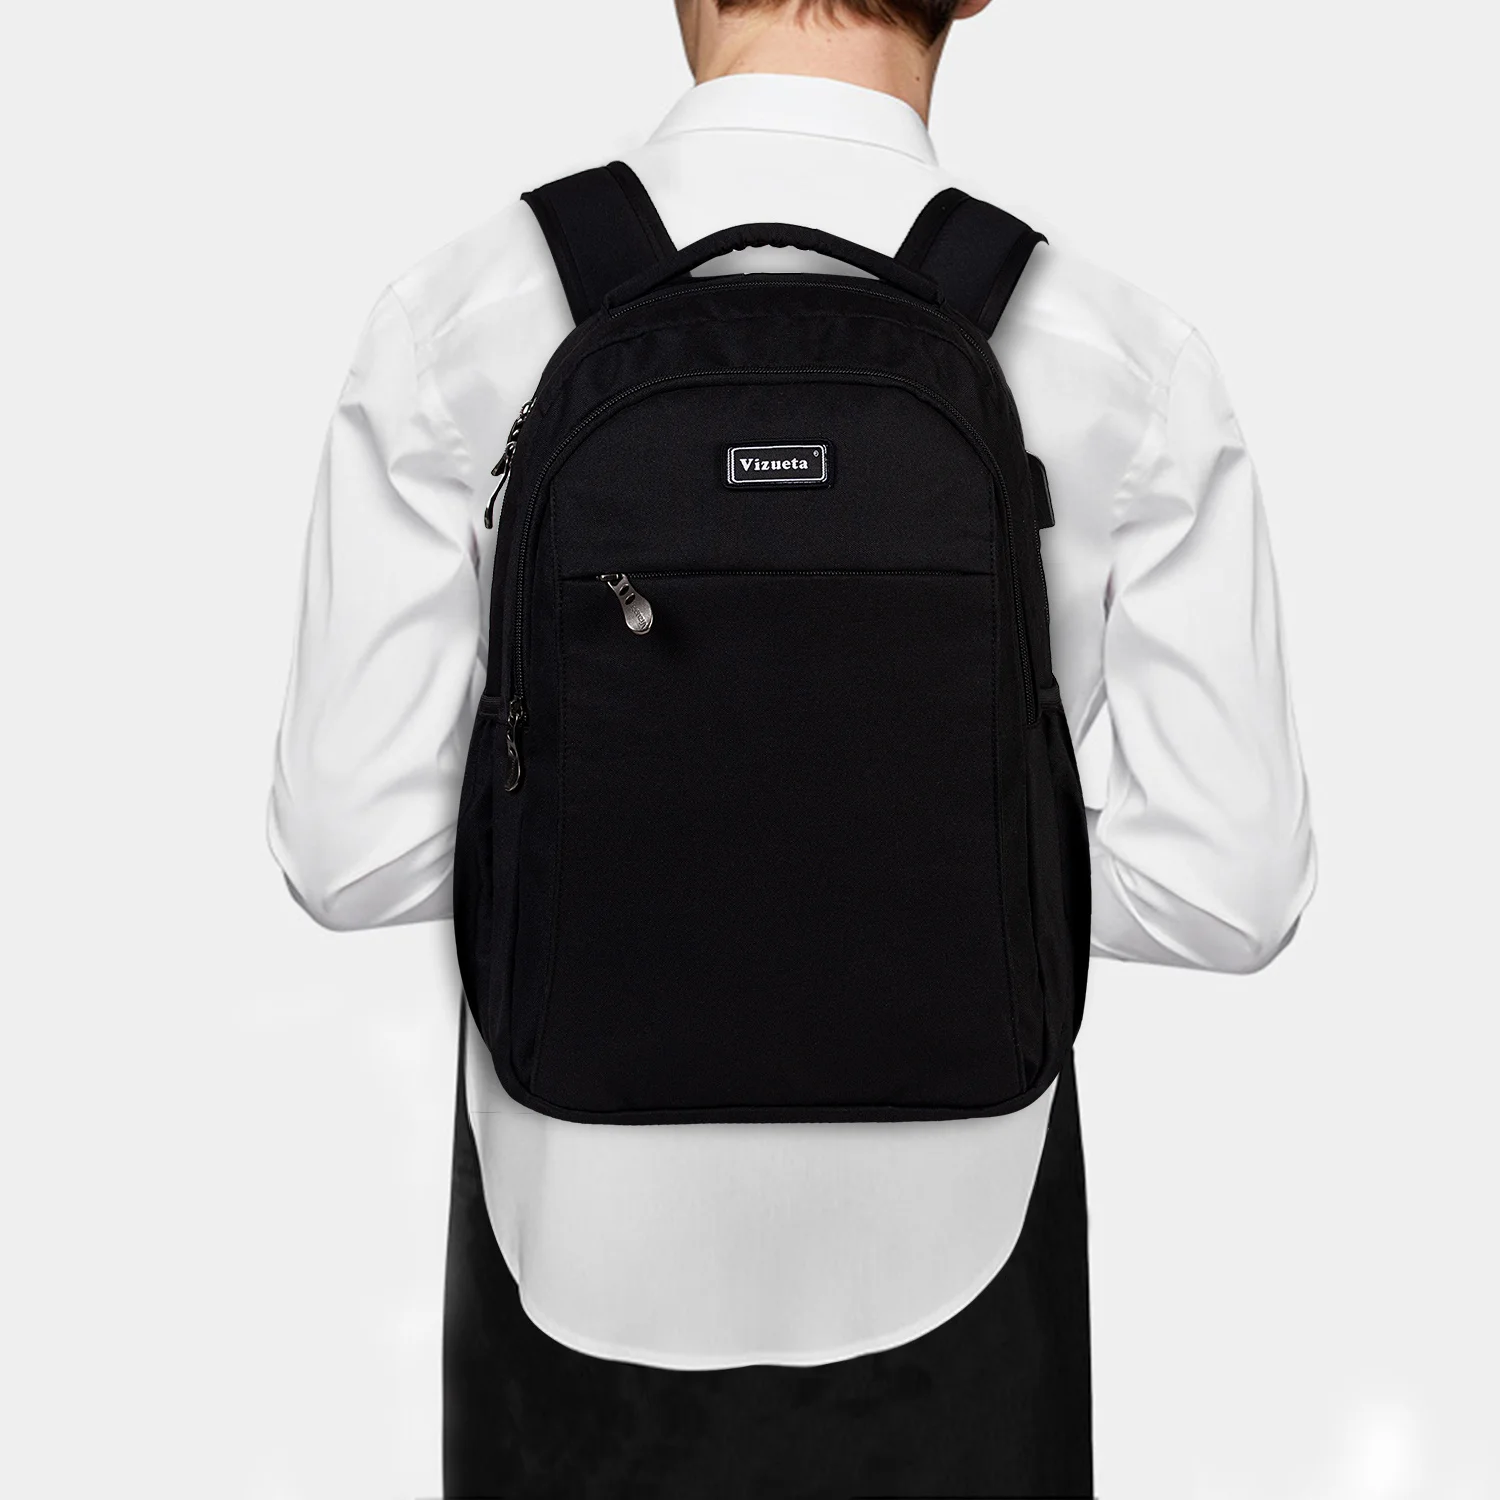 

Anti-Theft 2022 Wholesale Outdoor Travel Bag Business Taschen Sac A Dos Men Laptop Backpack Bags For Men College Backpack Laptop, Accept customized logo